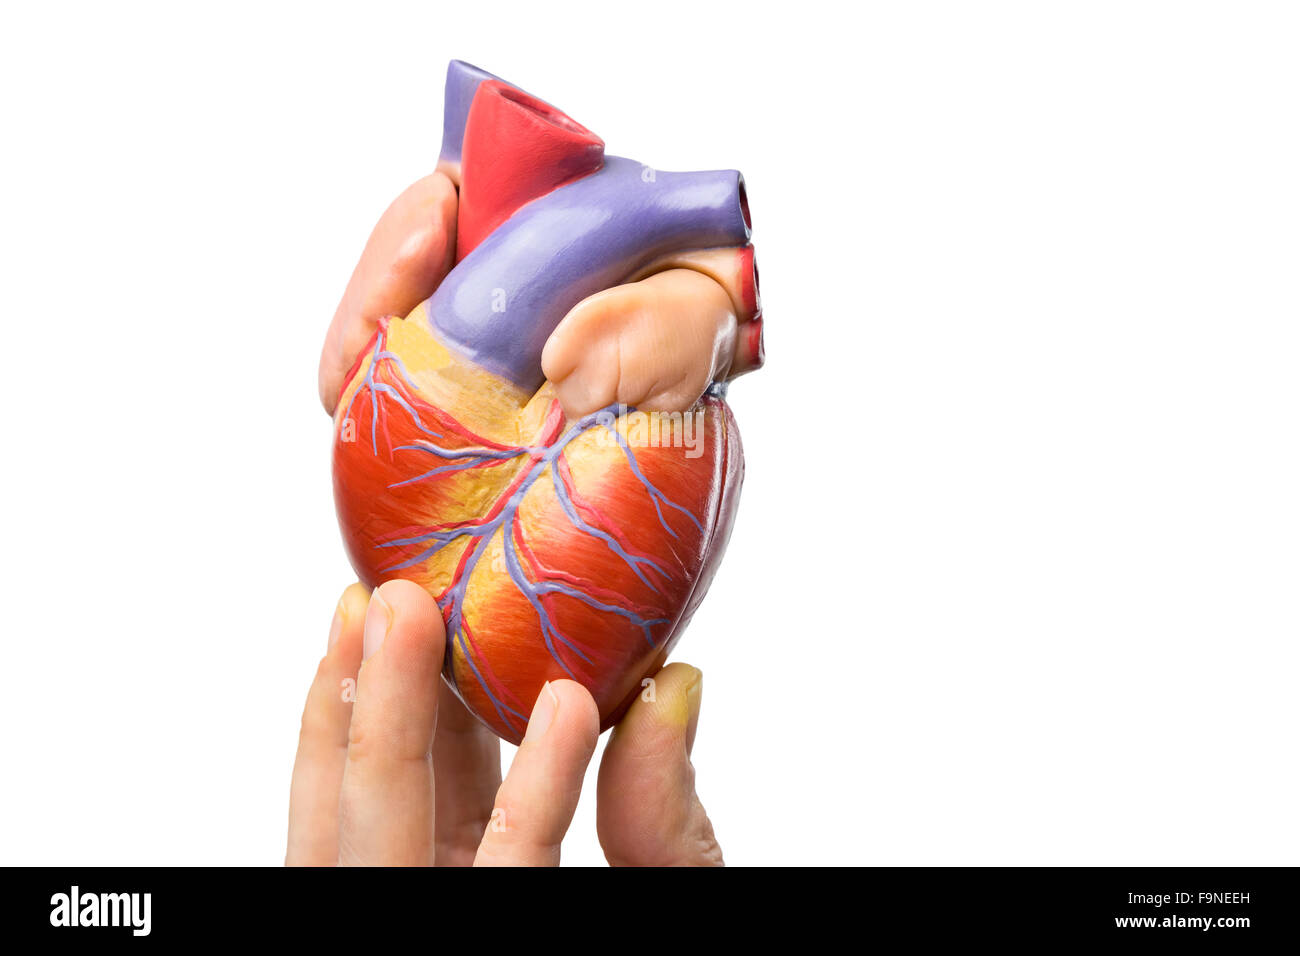 Fingers showing model of human heart isolated on white background Stock Photo